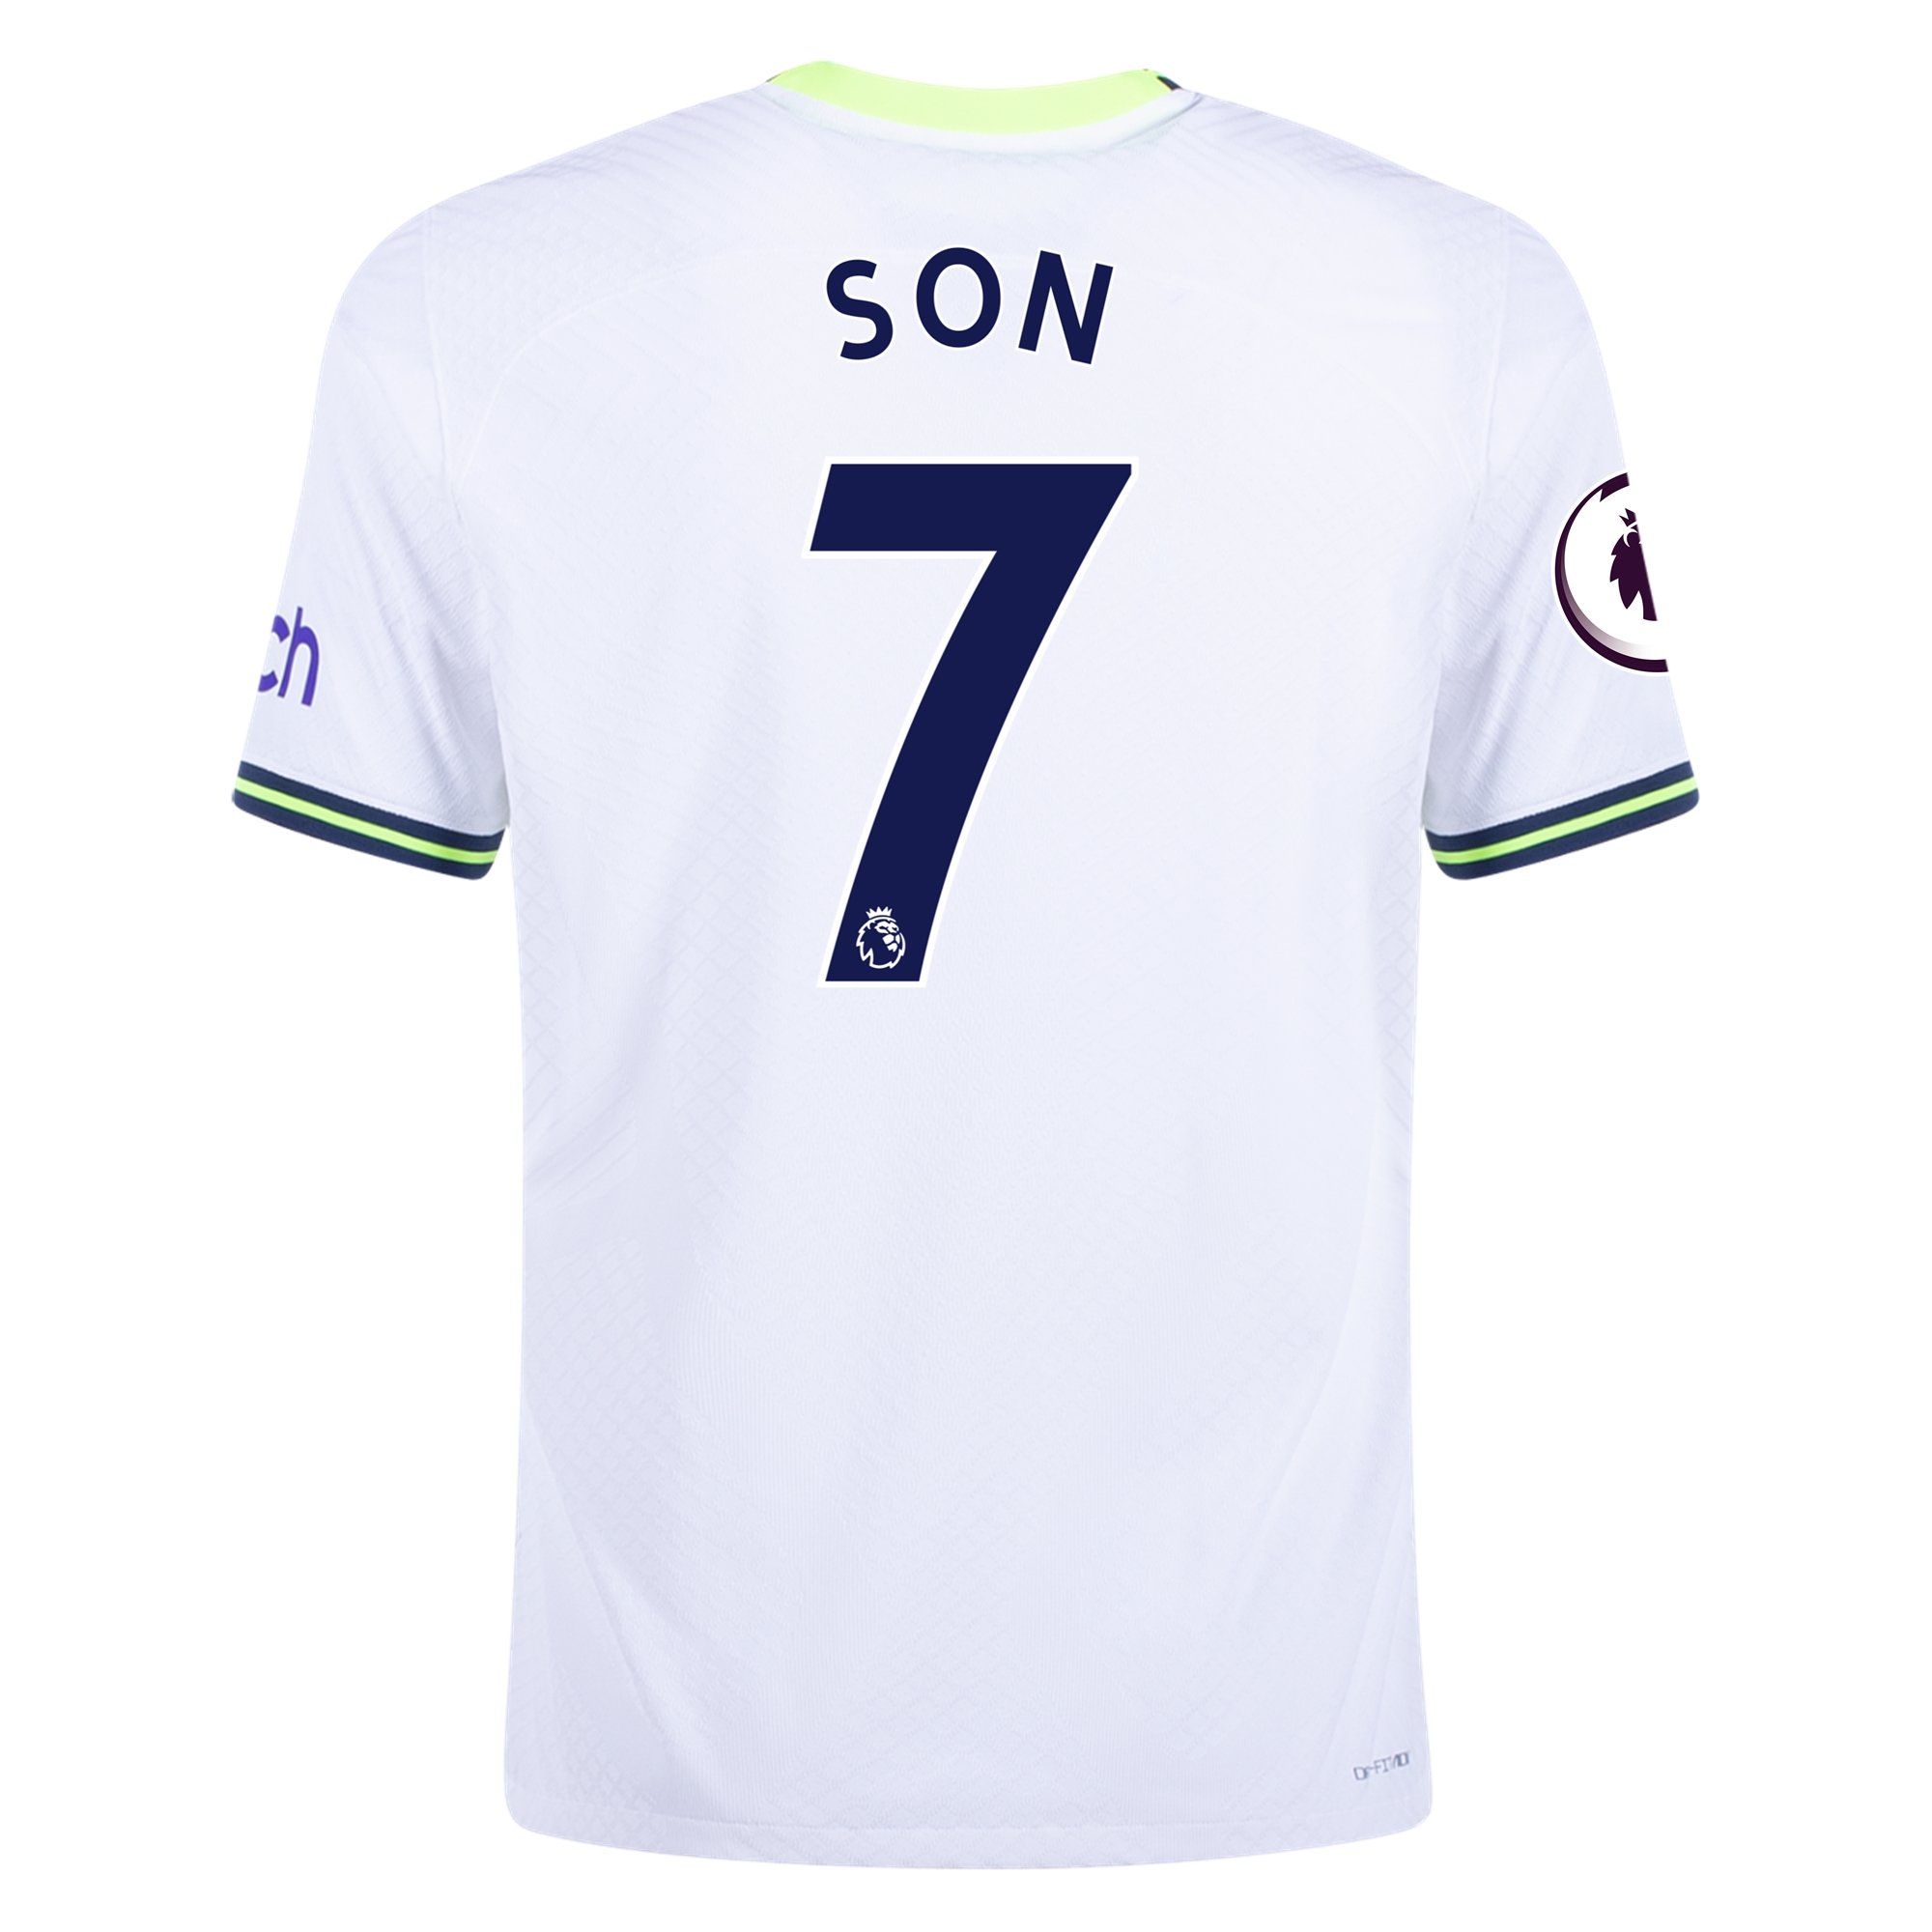 Son Heung-min Tottenham 22/23 Authentic Home Jersey by Nike – Arena Jerseys